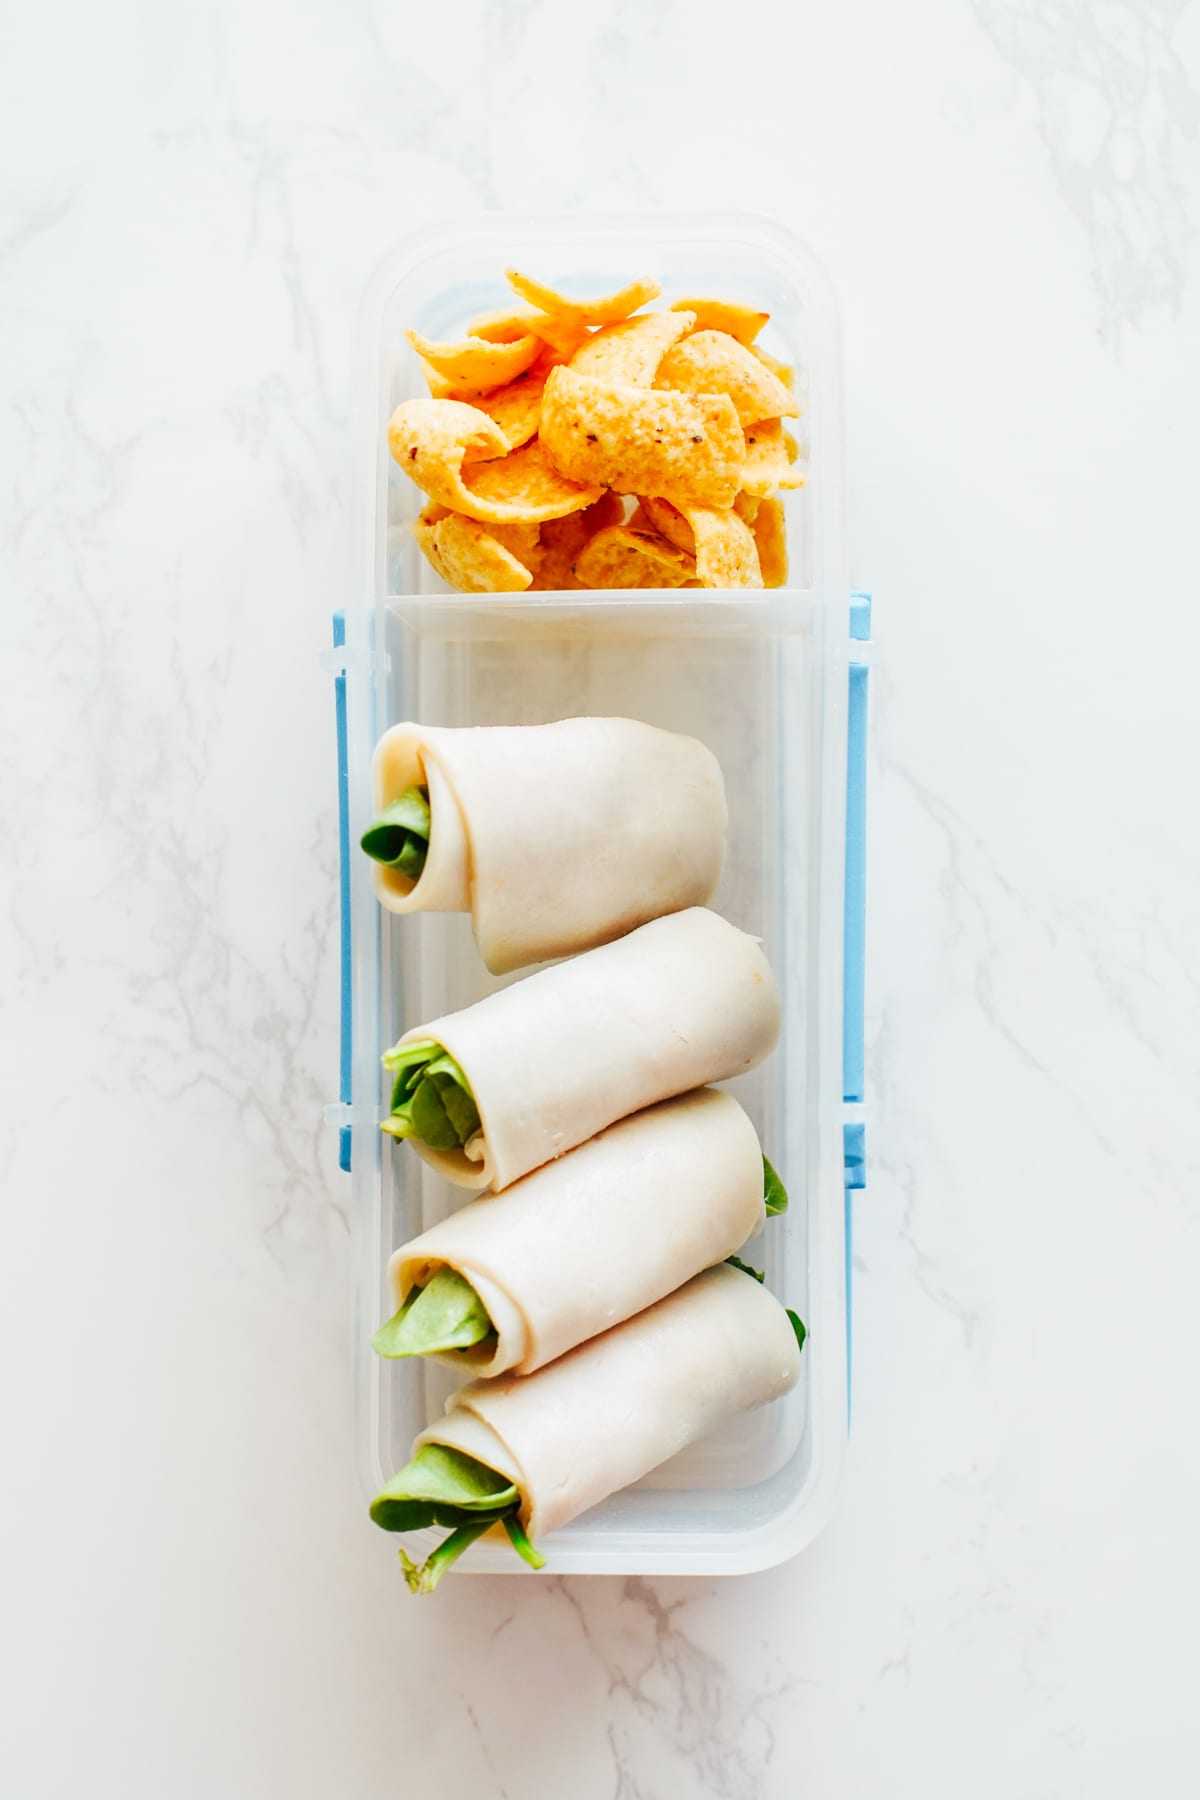 healthy kids school snack ideas: lunch meat rolled up with spinach for school snack